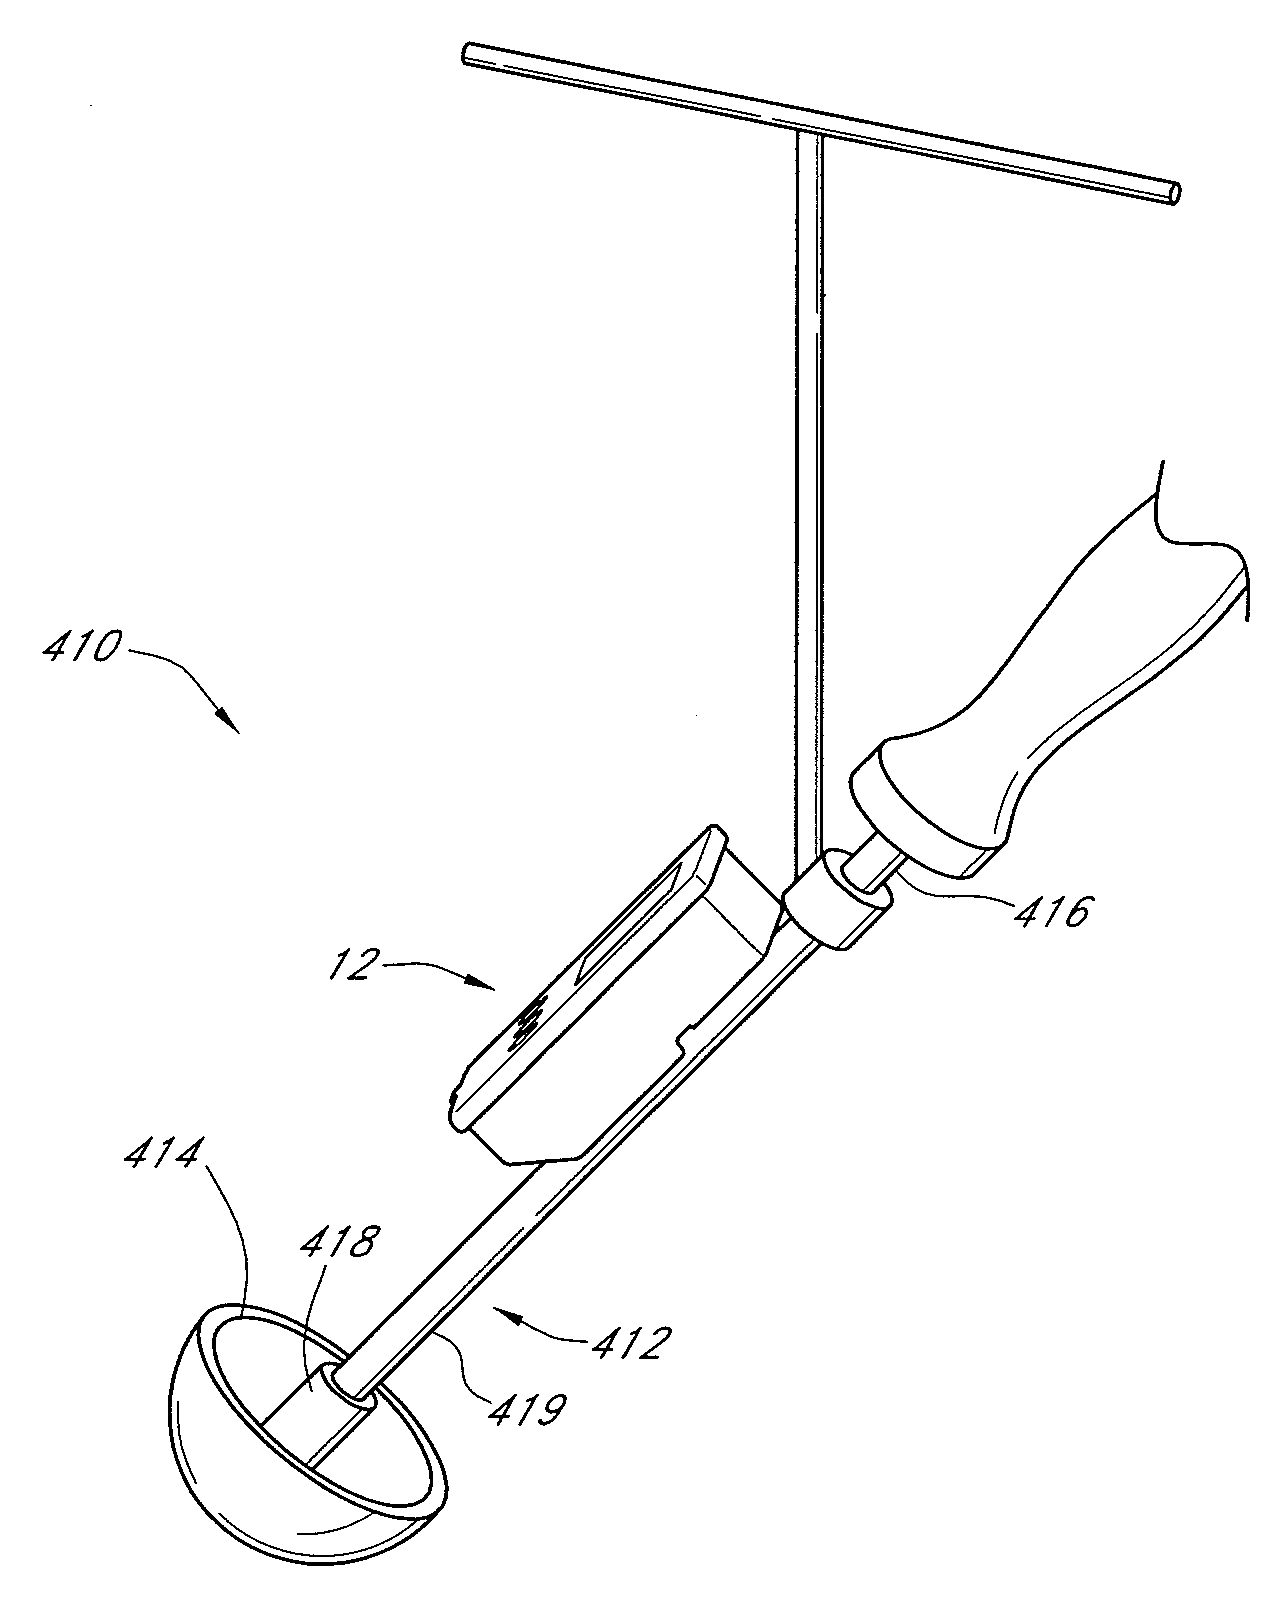 Hip surgery systems and methods